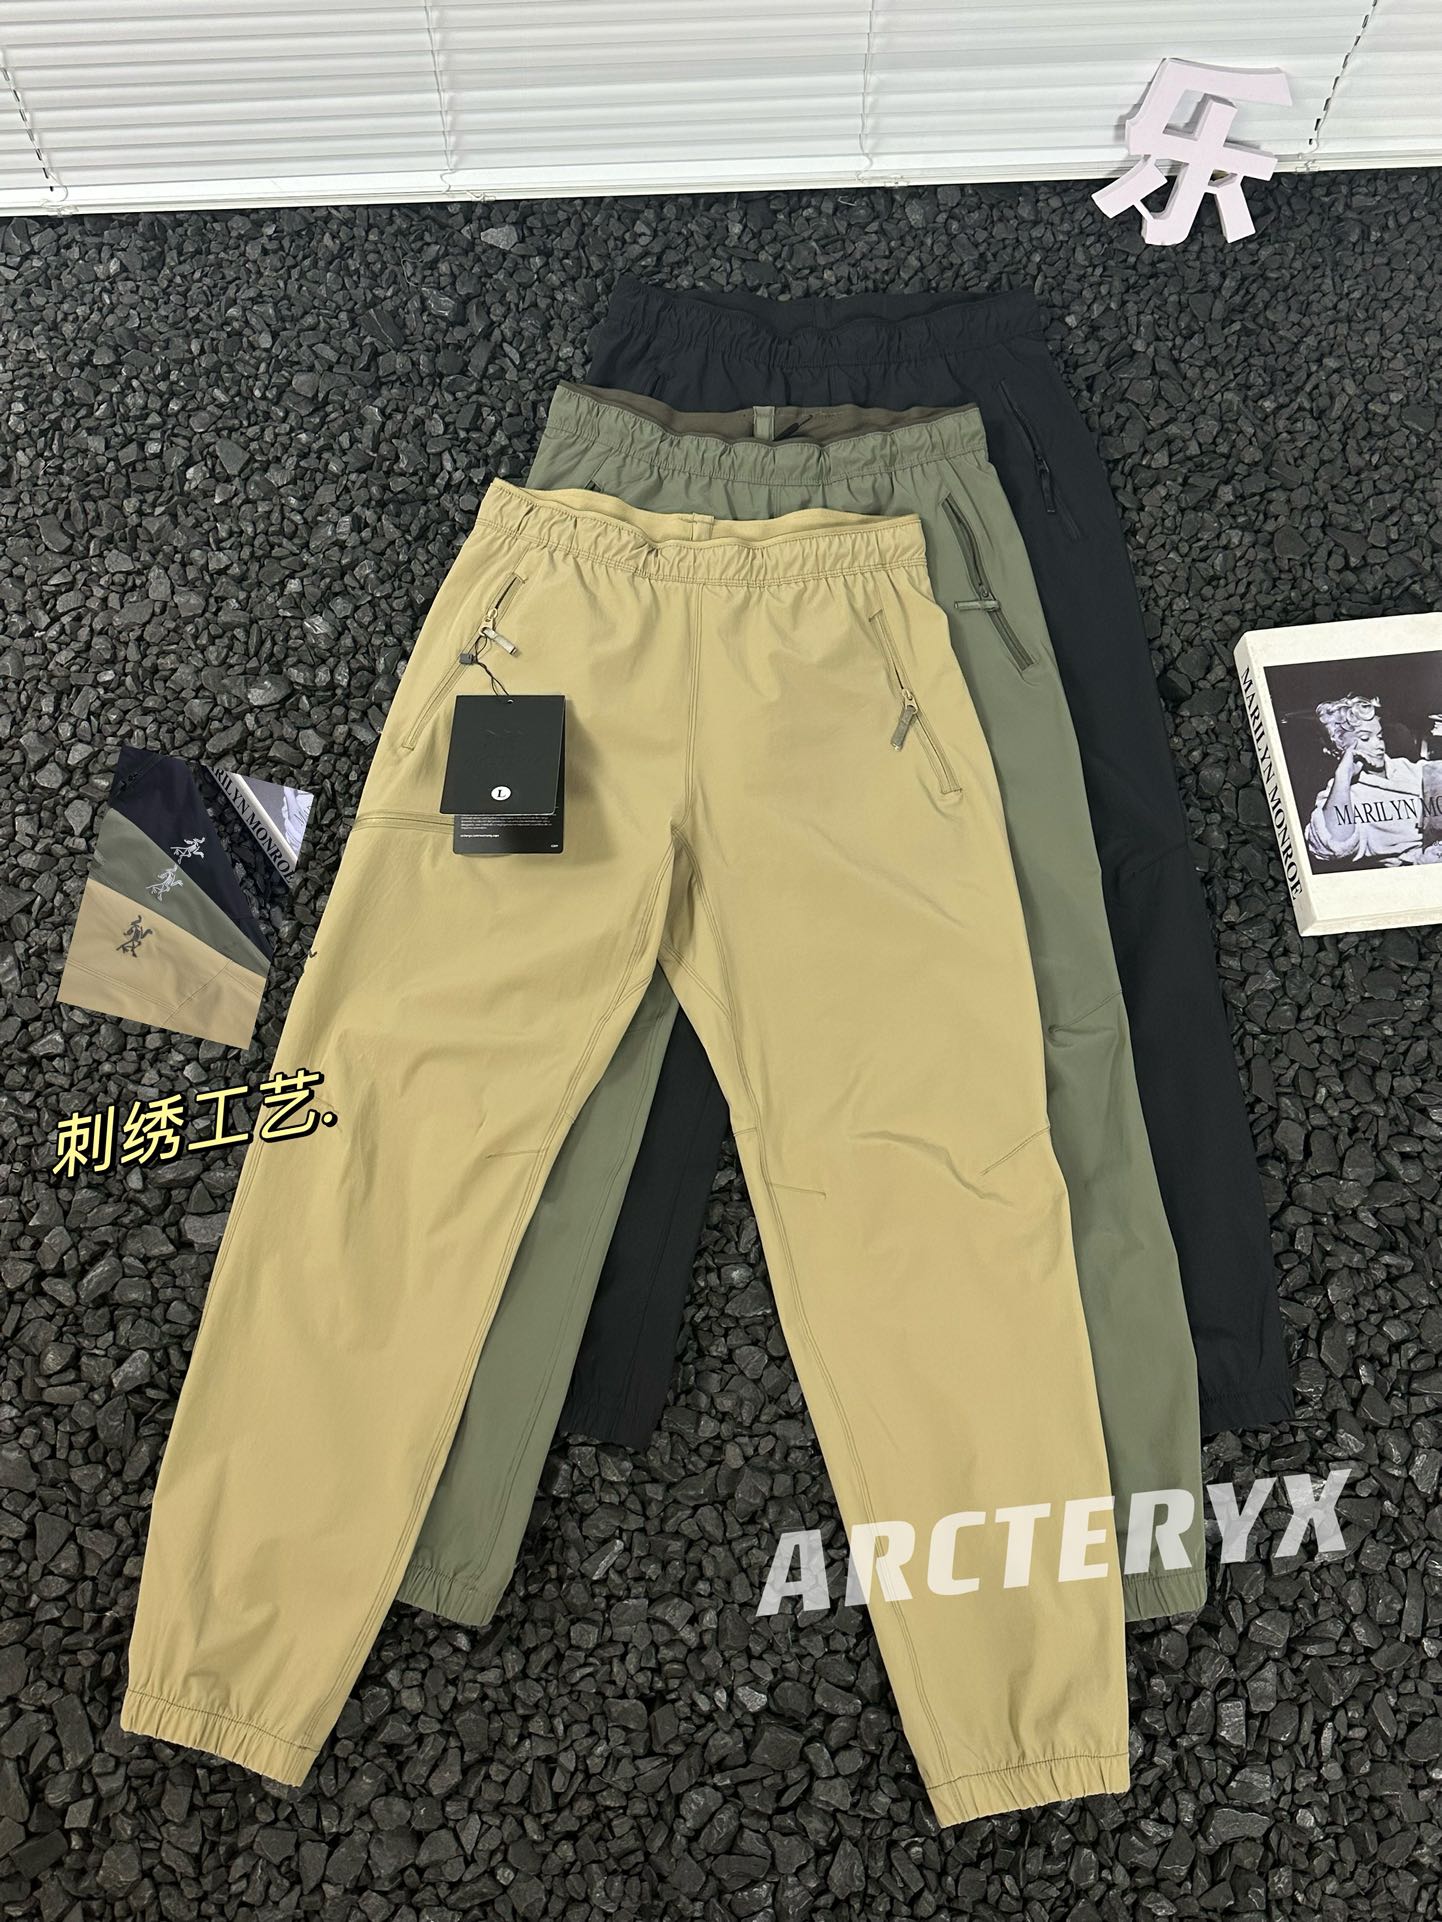 Arc’teryx Clothing Pants & Trousers ArmyGreen Black Green Khaki Embroidery Spring/Summer Collection Casual